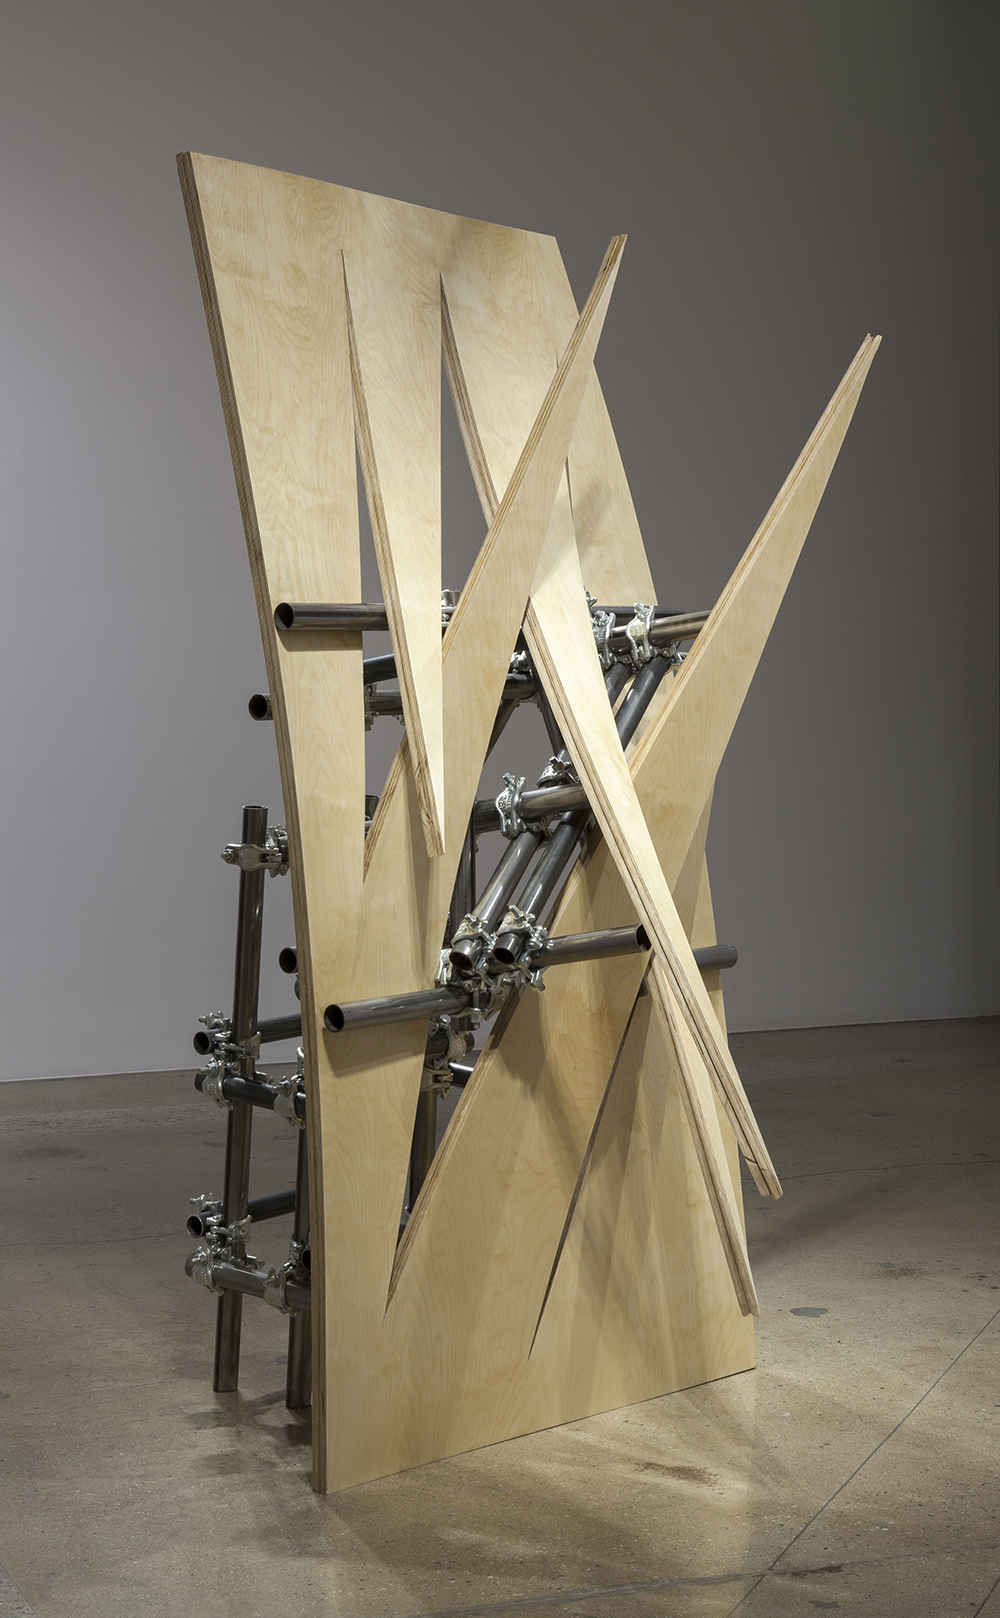 luciana lamothe, sculpture, women sculptor, installation, free function, form over function, tension, plywood, iron pipes, couplers,